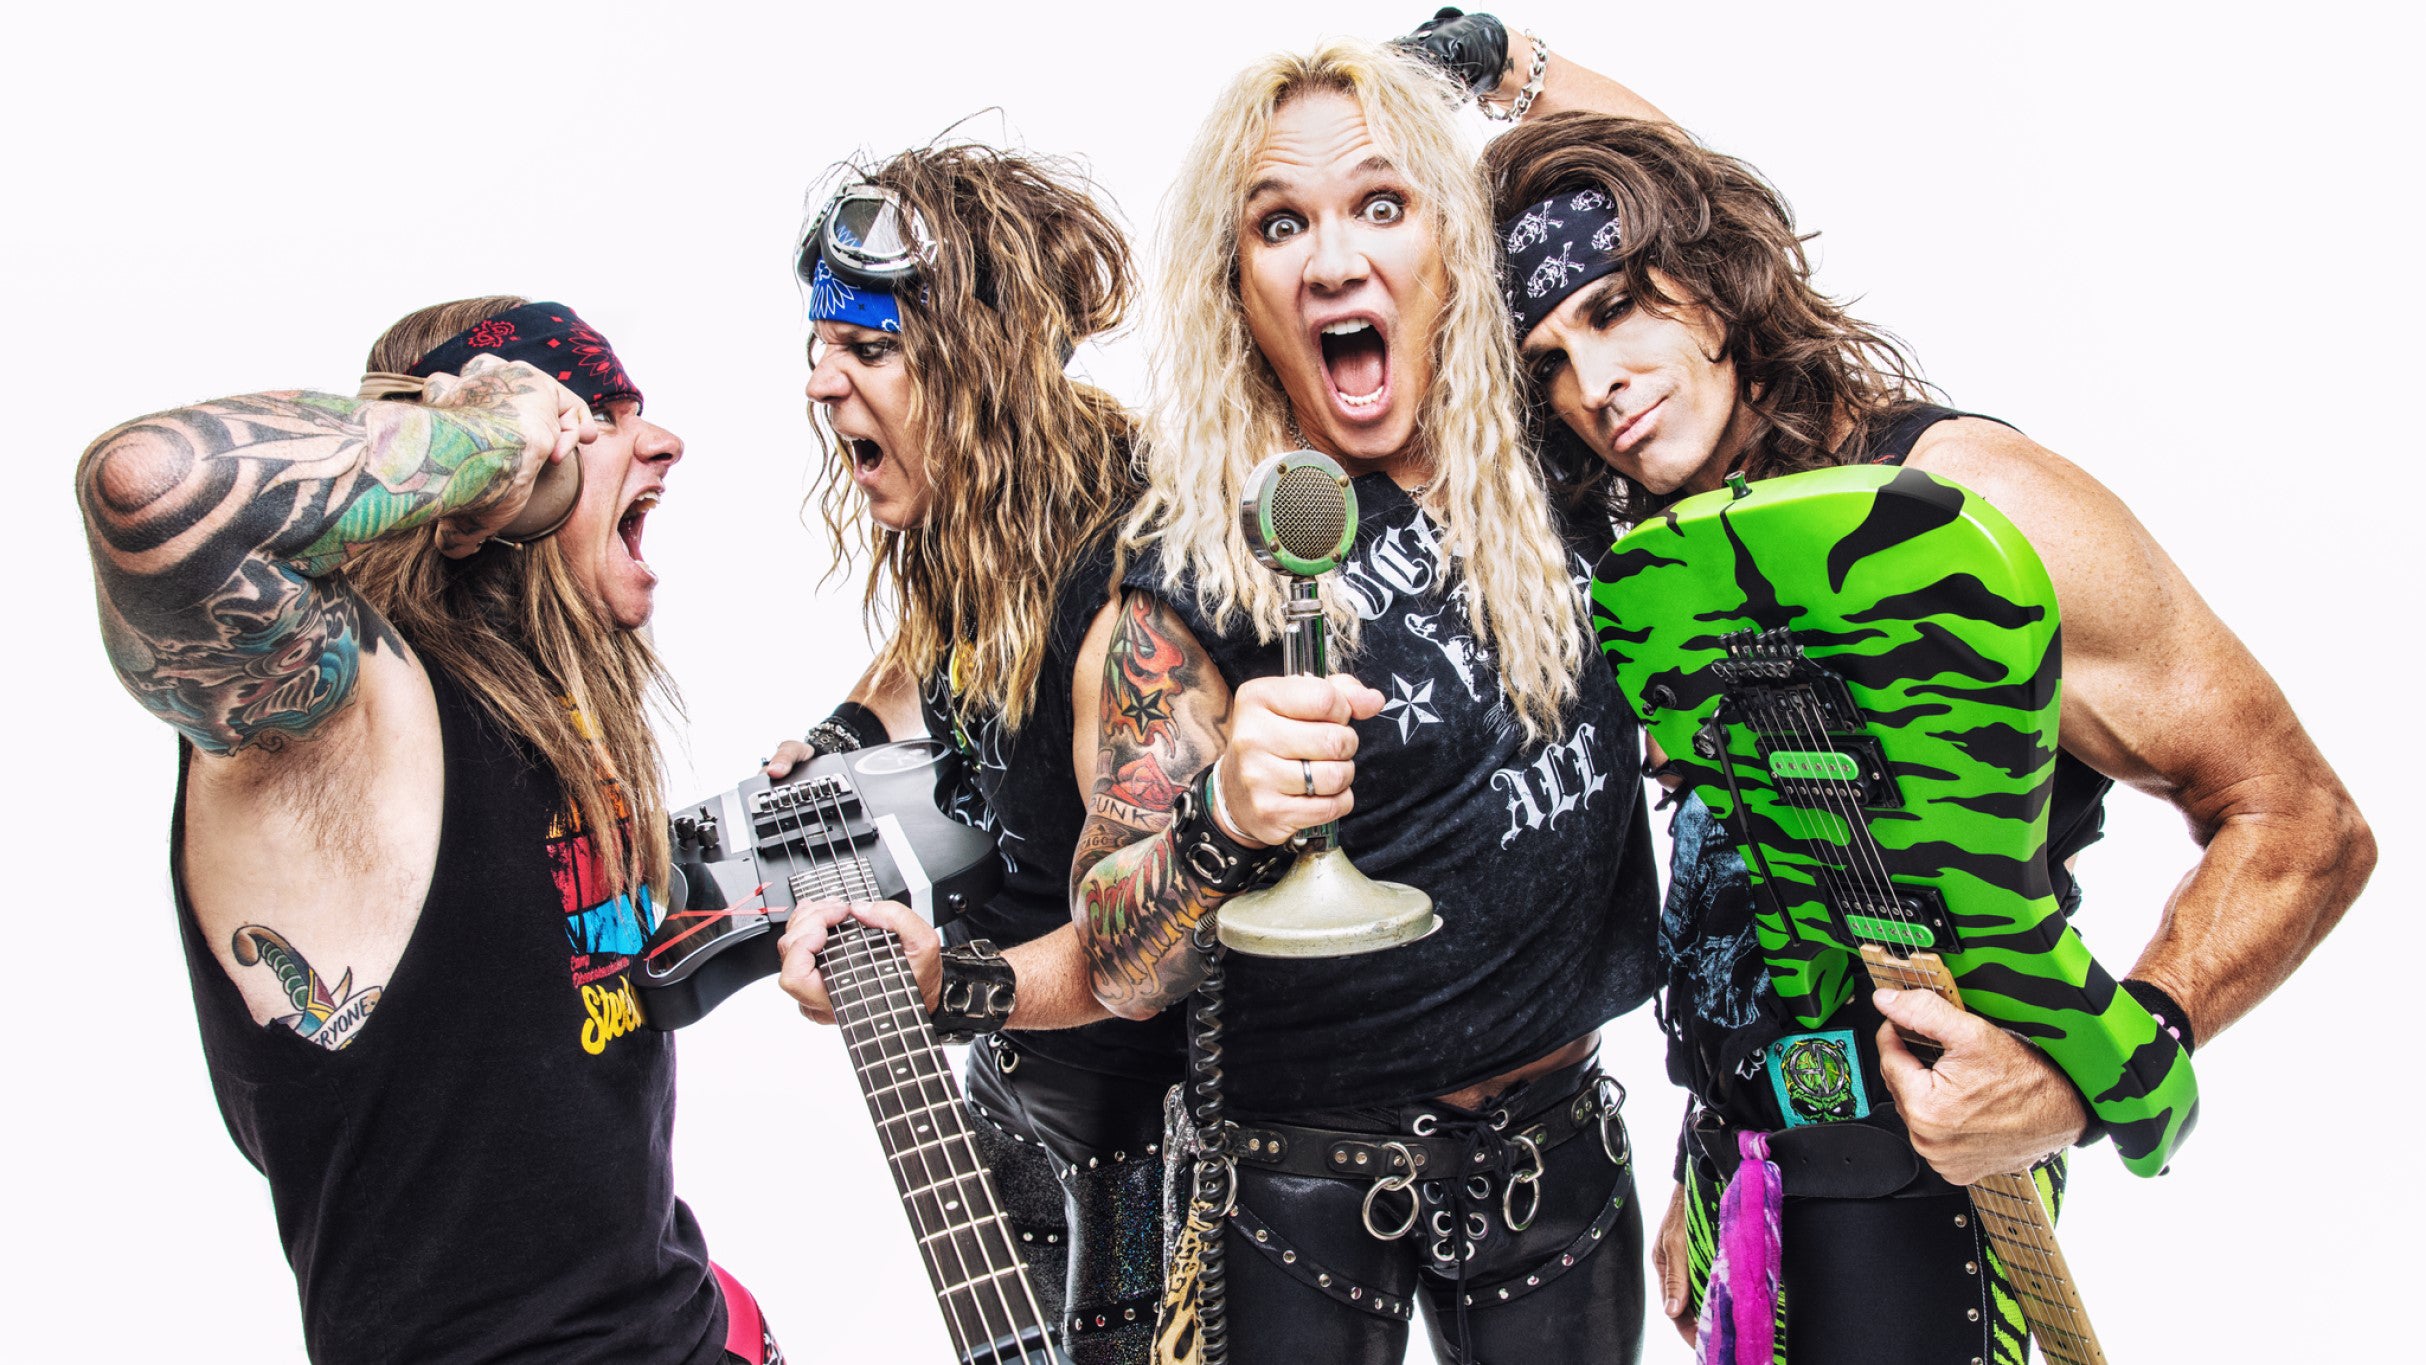 Steel Panther - On The Prowl World Tour in New Orleans promo photo for HOB Foundation Room presale offer code